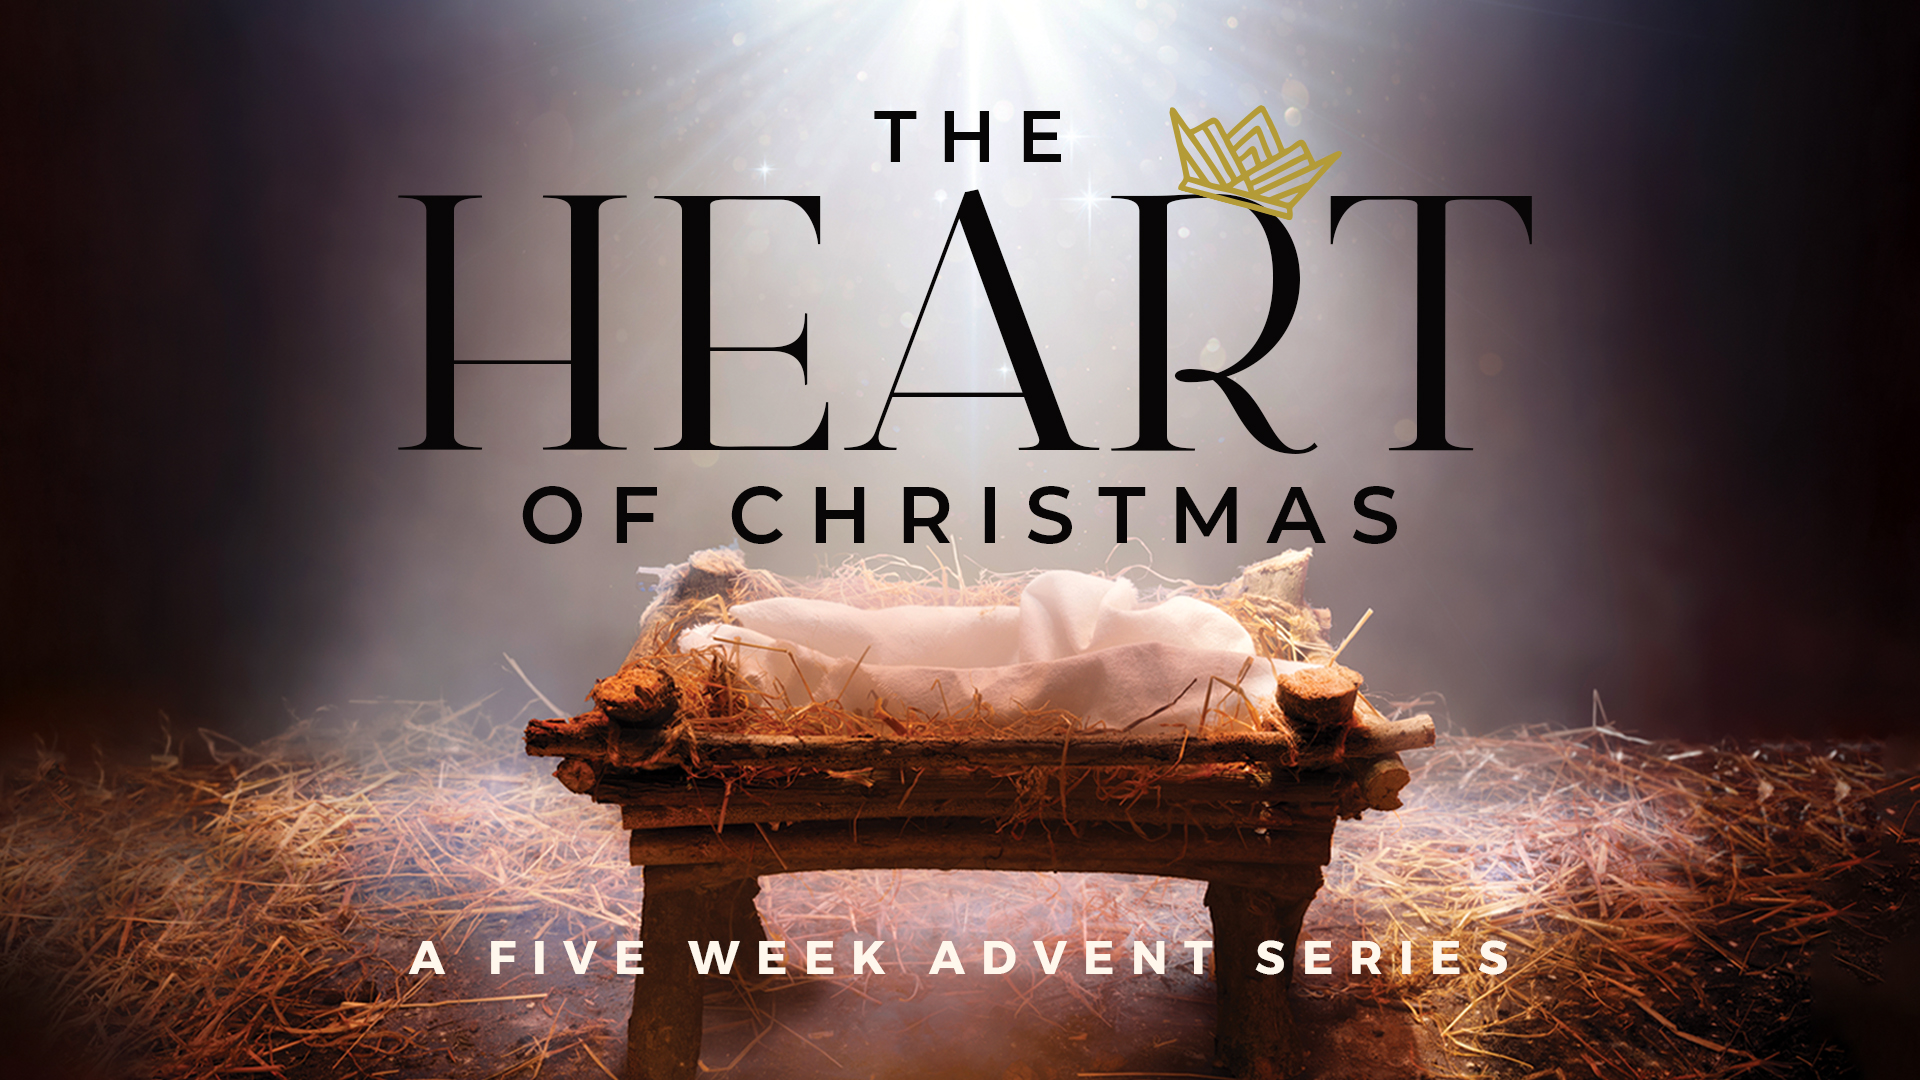 Jesus is the Heart of Christmas